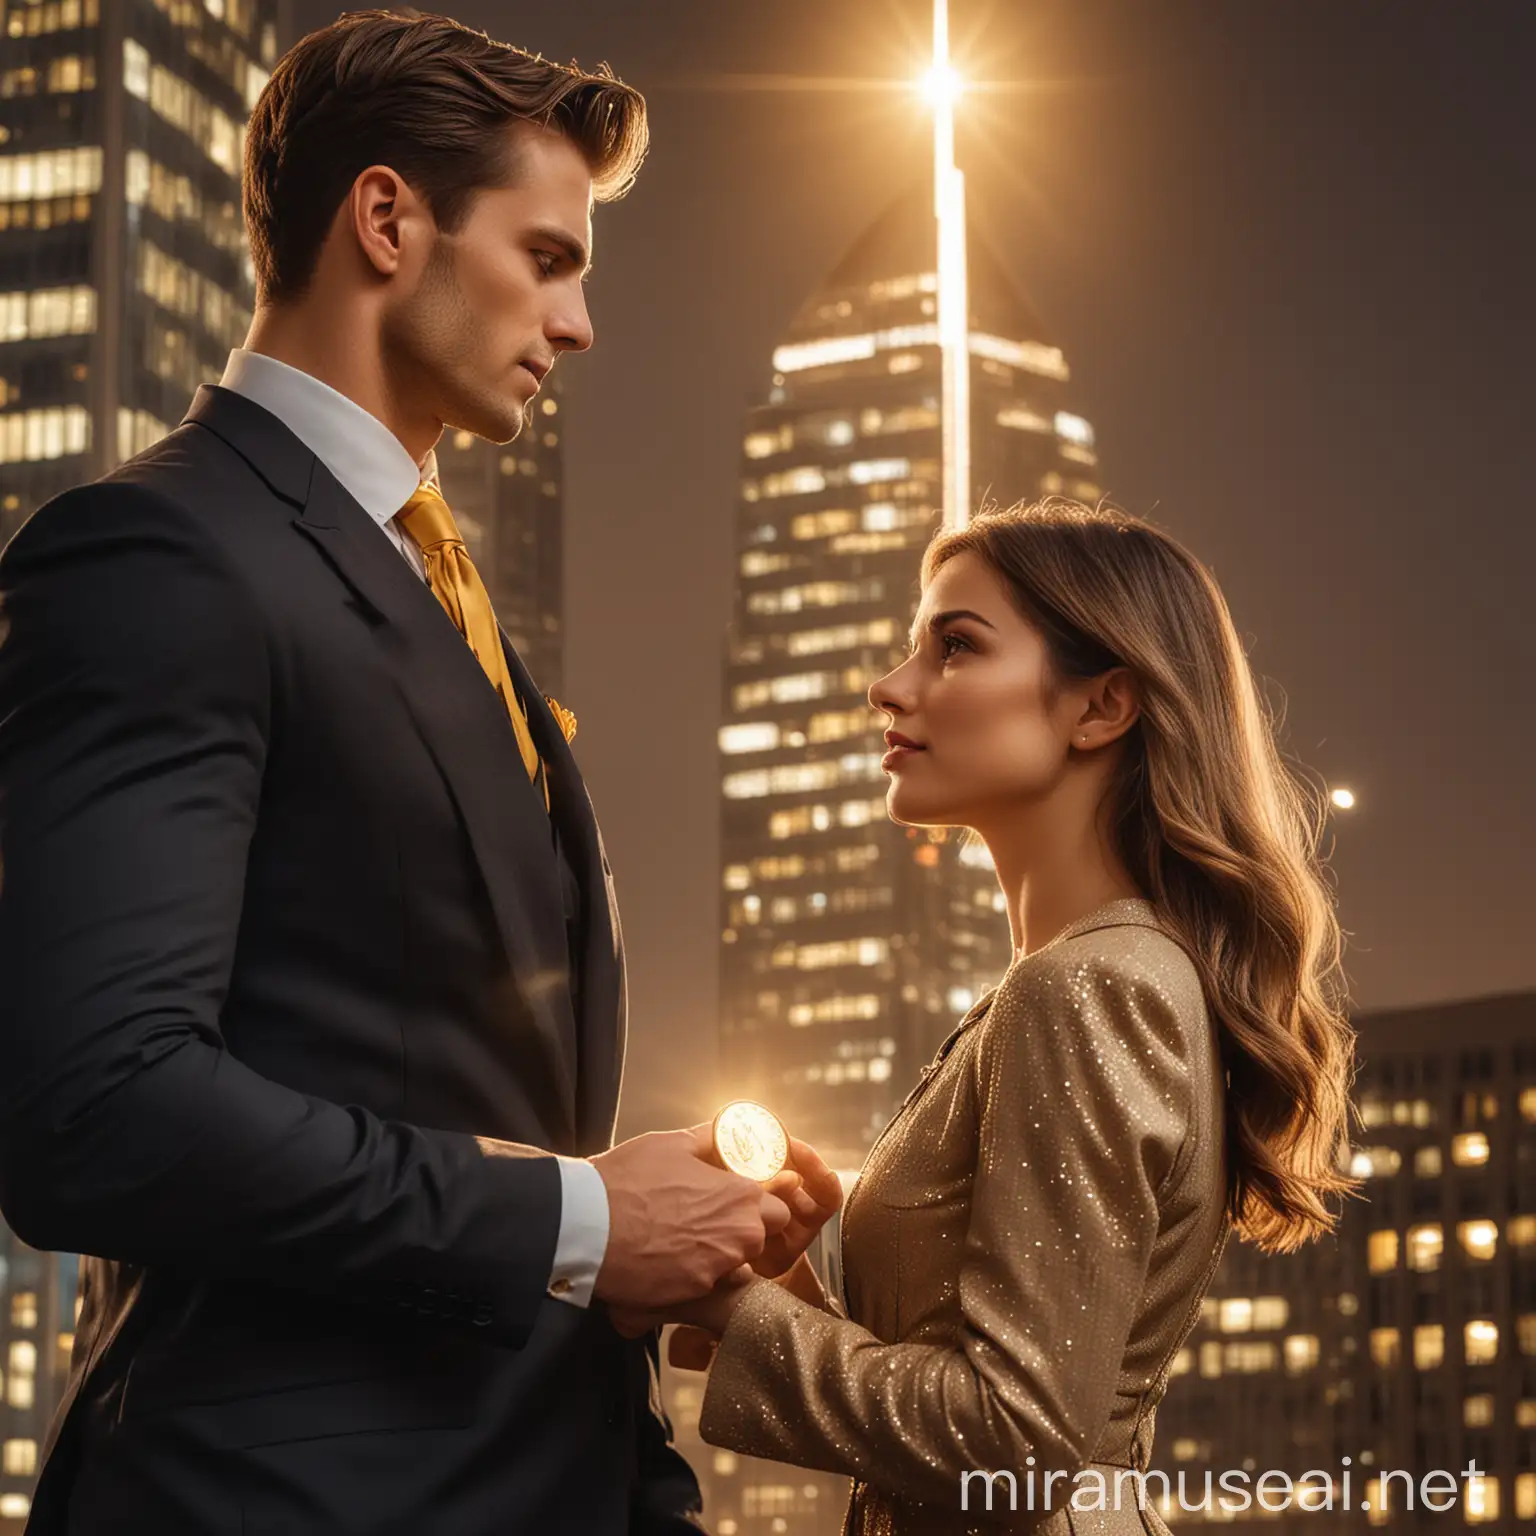 A beautiful lady in a dress, held by a handsome young light muscular man in suit, looking at each other, with a coin standing vertically behind them and a golden luminous light glowing behind them in front of a skyscraper. 